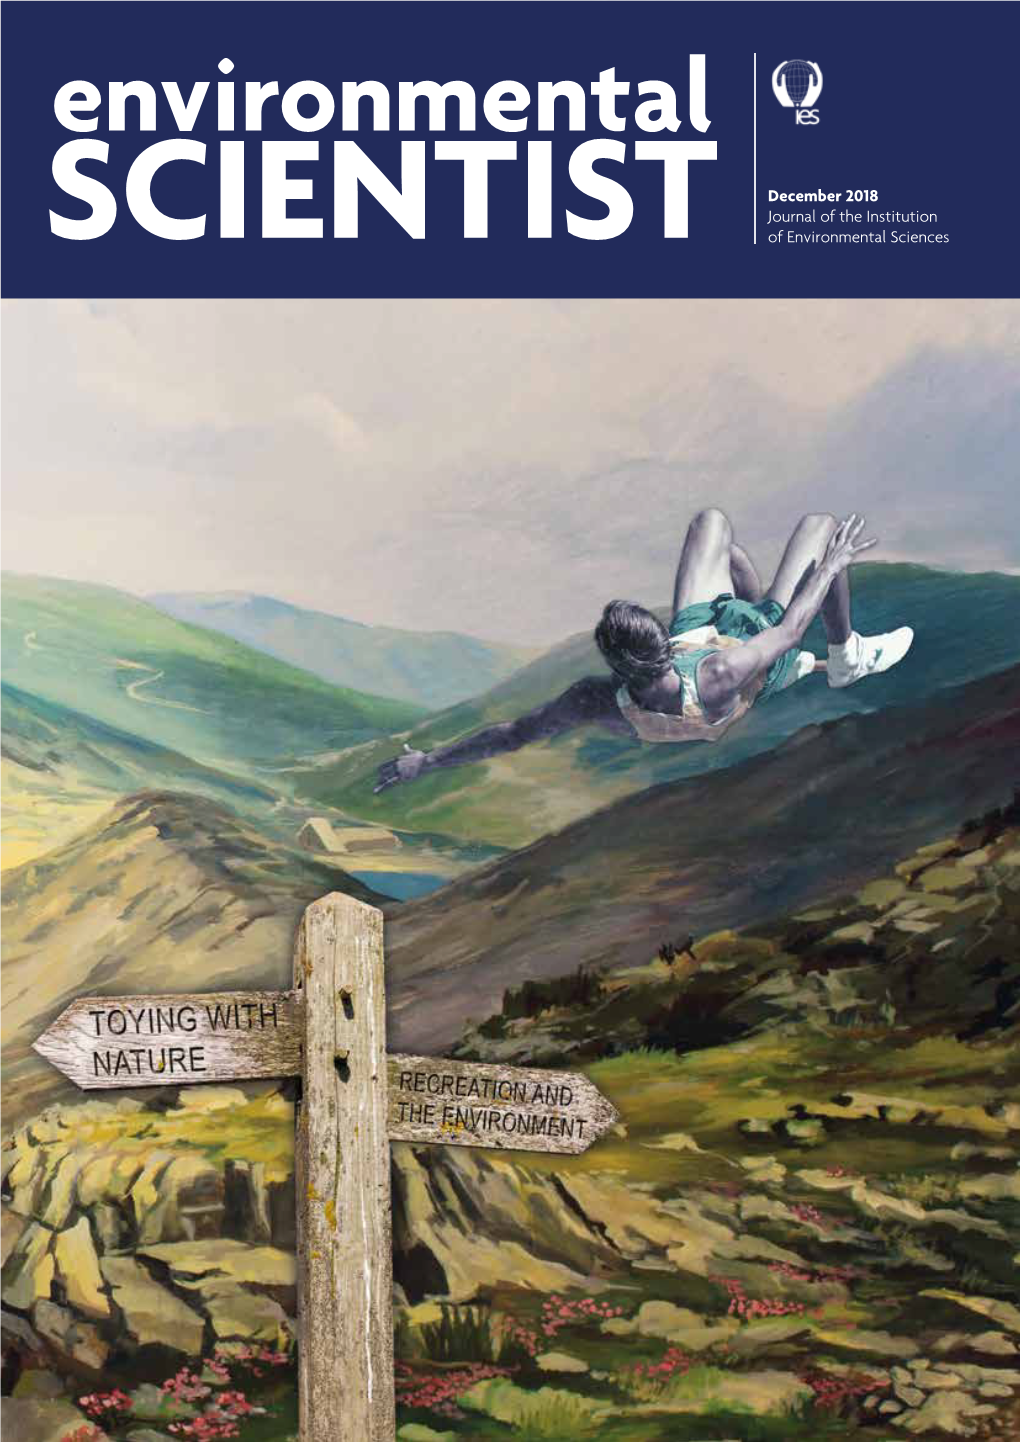 December 2018 Journal of the Institution of Environmental Sciences CONTENTS >